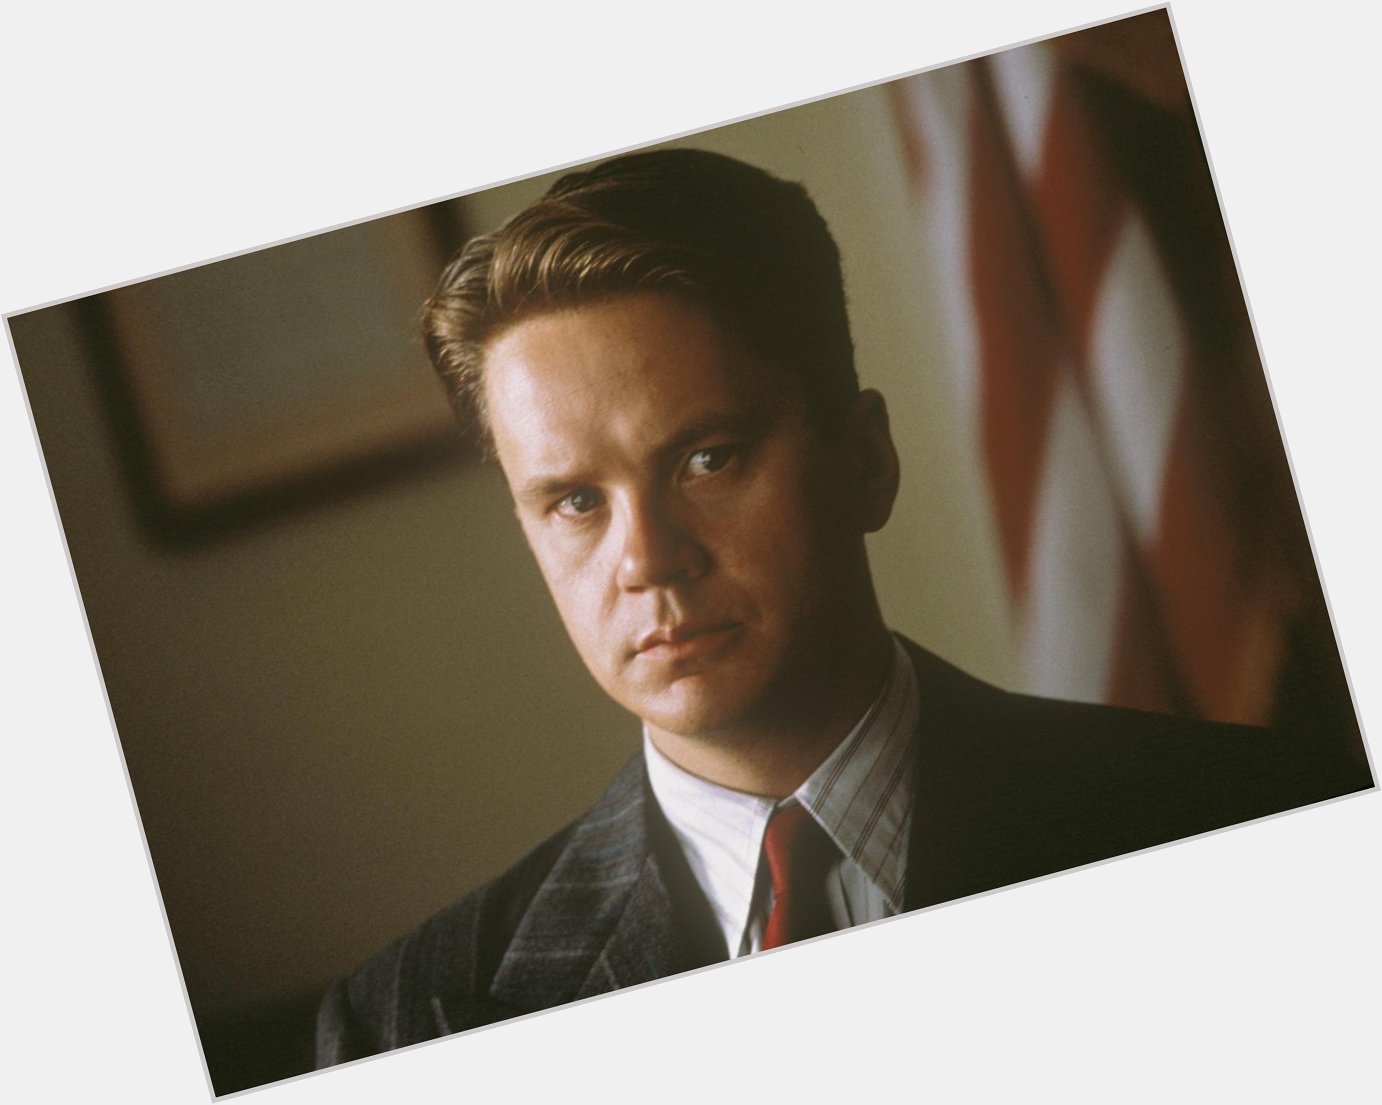 Happy birthday to our Andy Dufresne, Tim Robbins! 